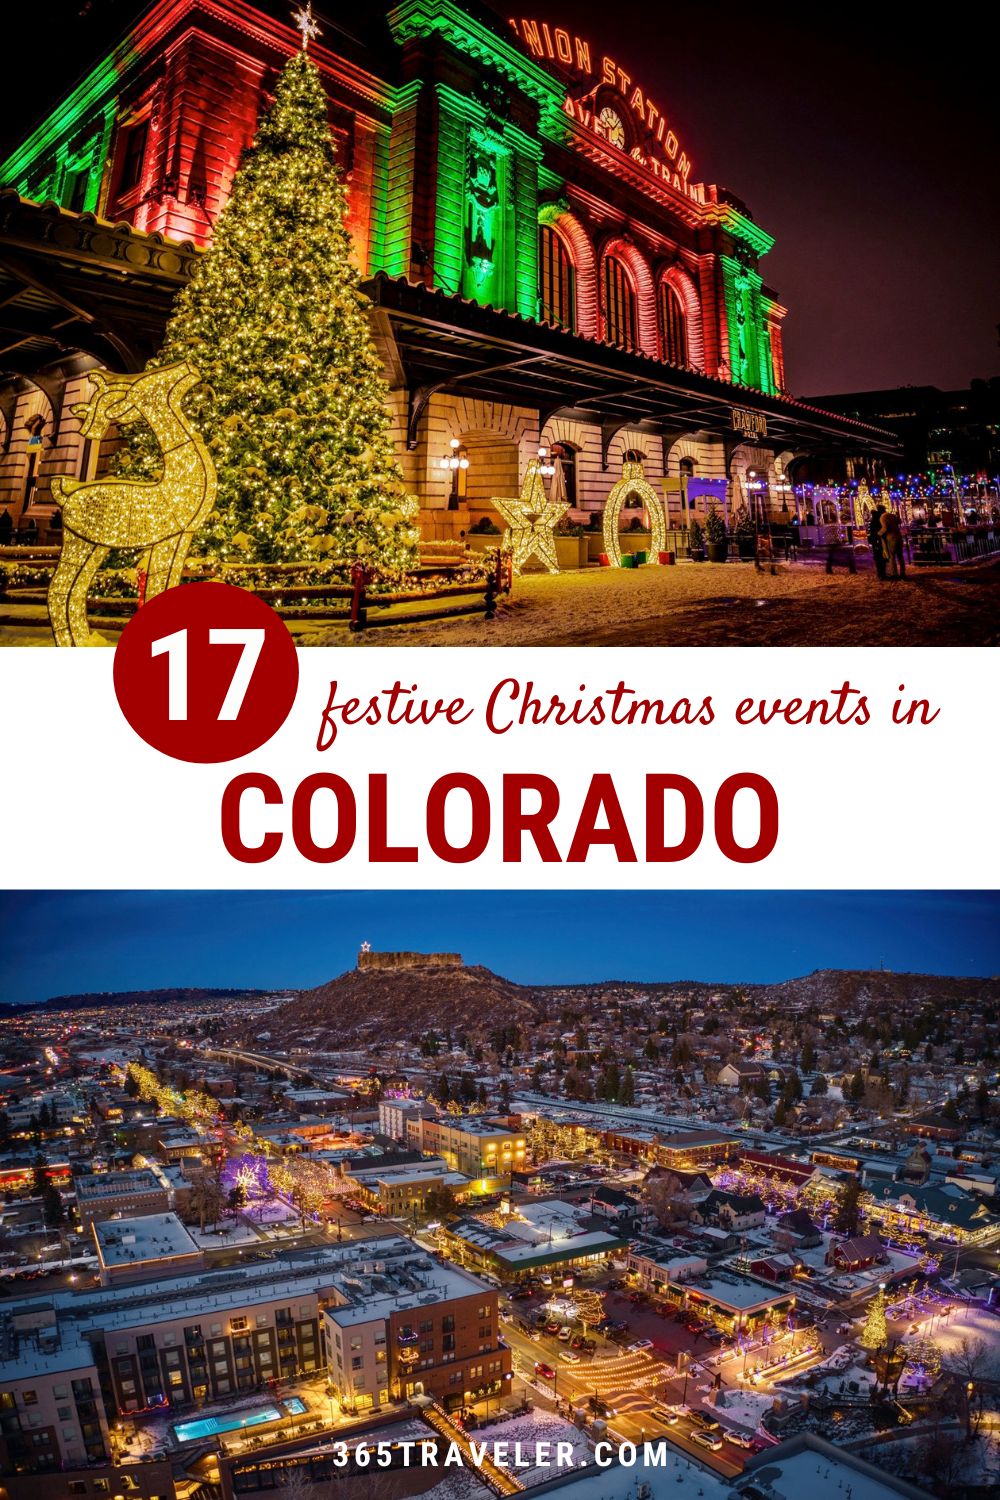 17 Festive Ways To Have a Merry Christmas, Colorado Style